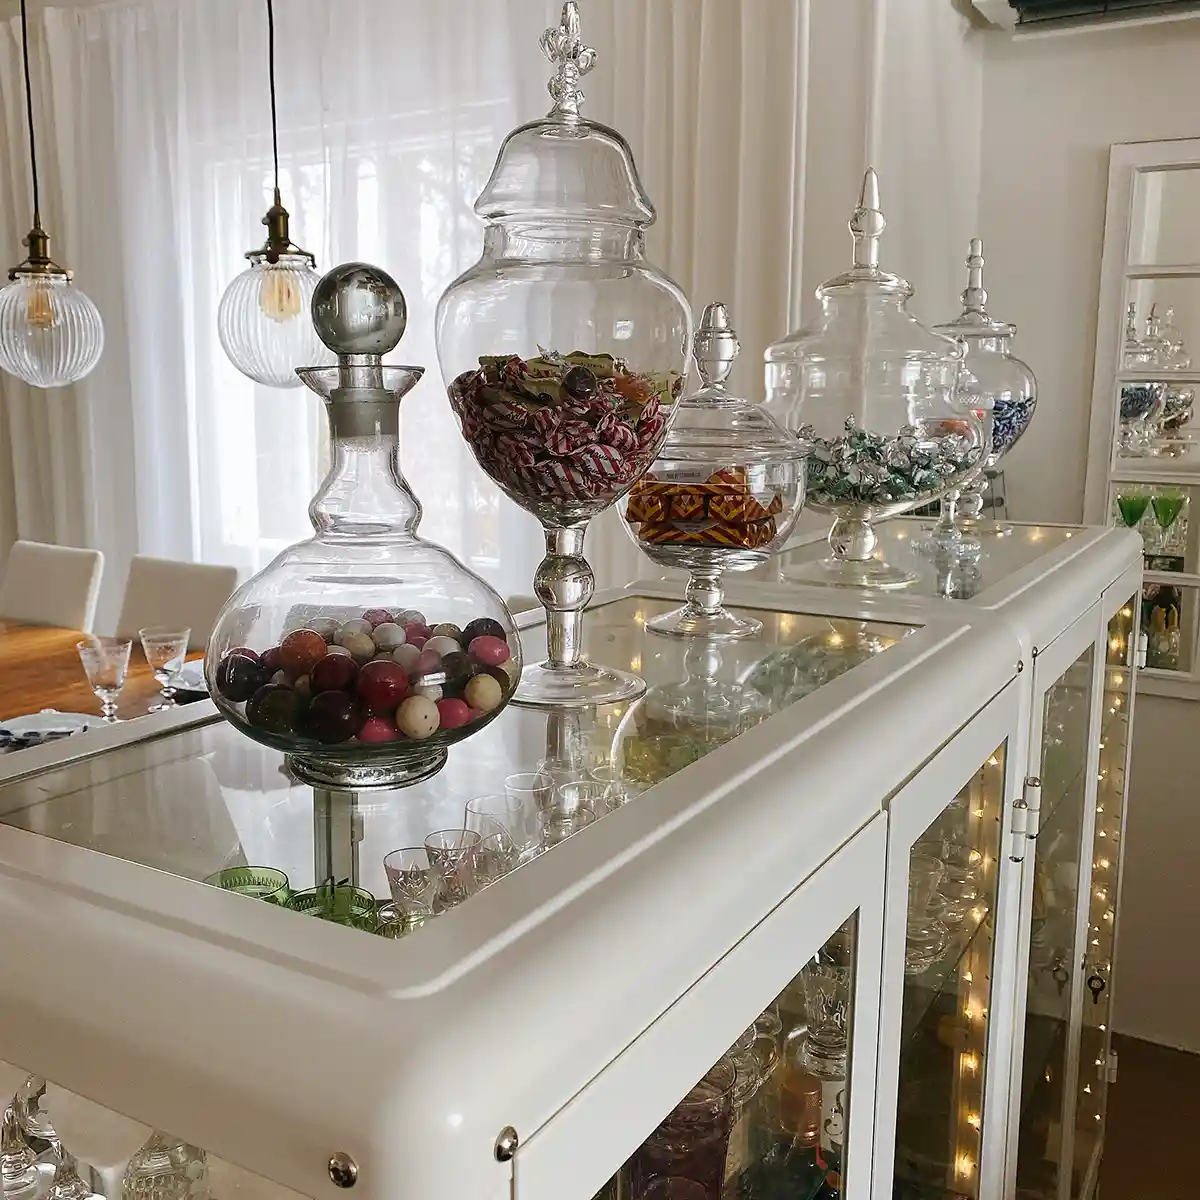 Candy jars decorations